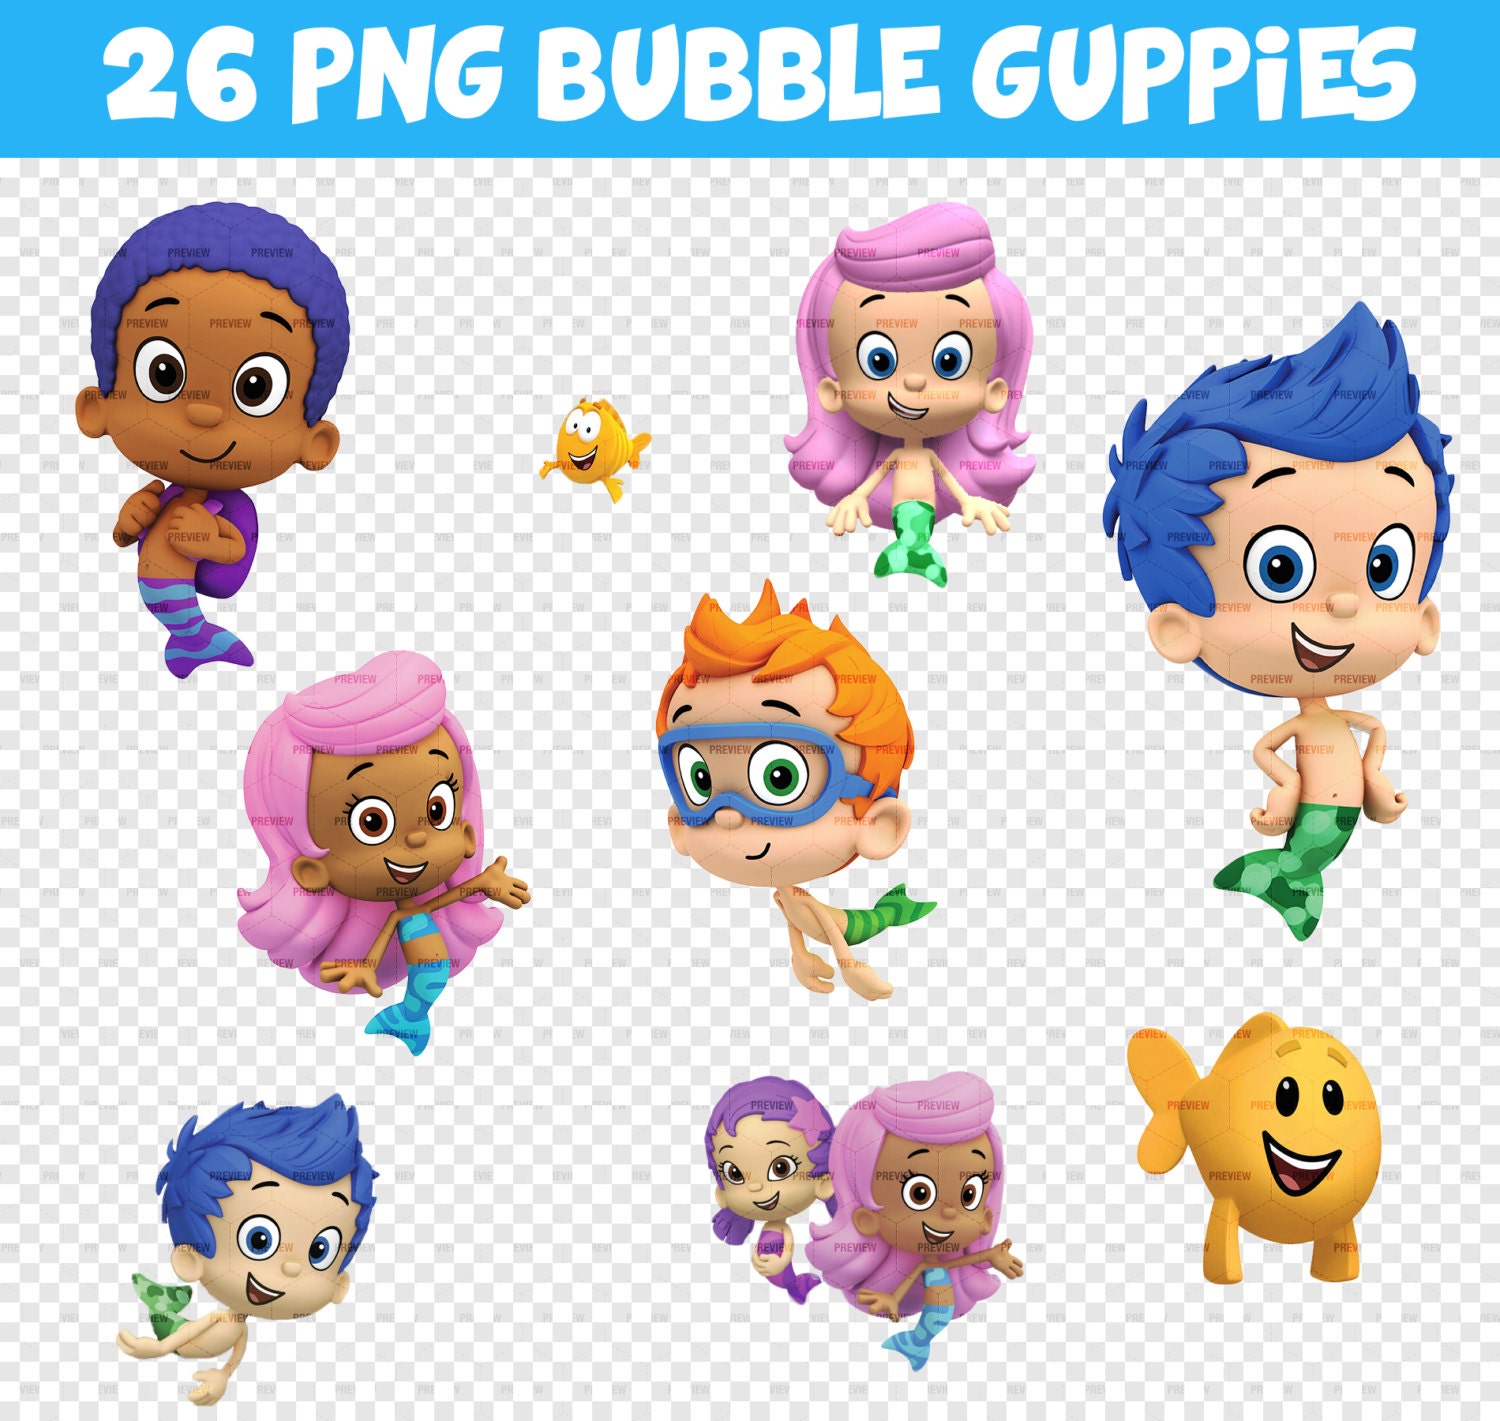 Bubble guppies inflation